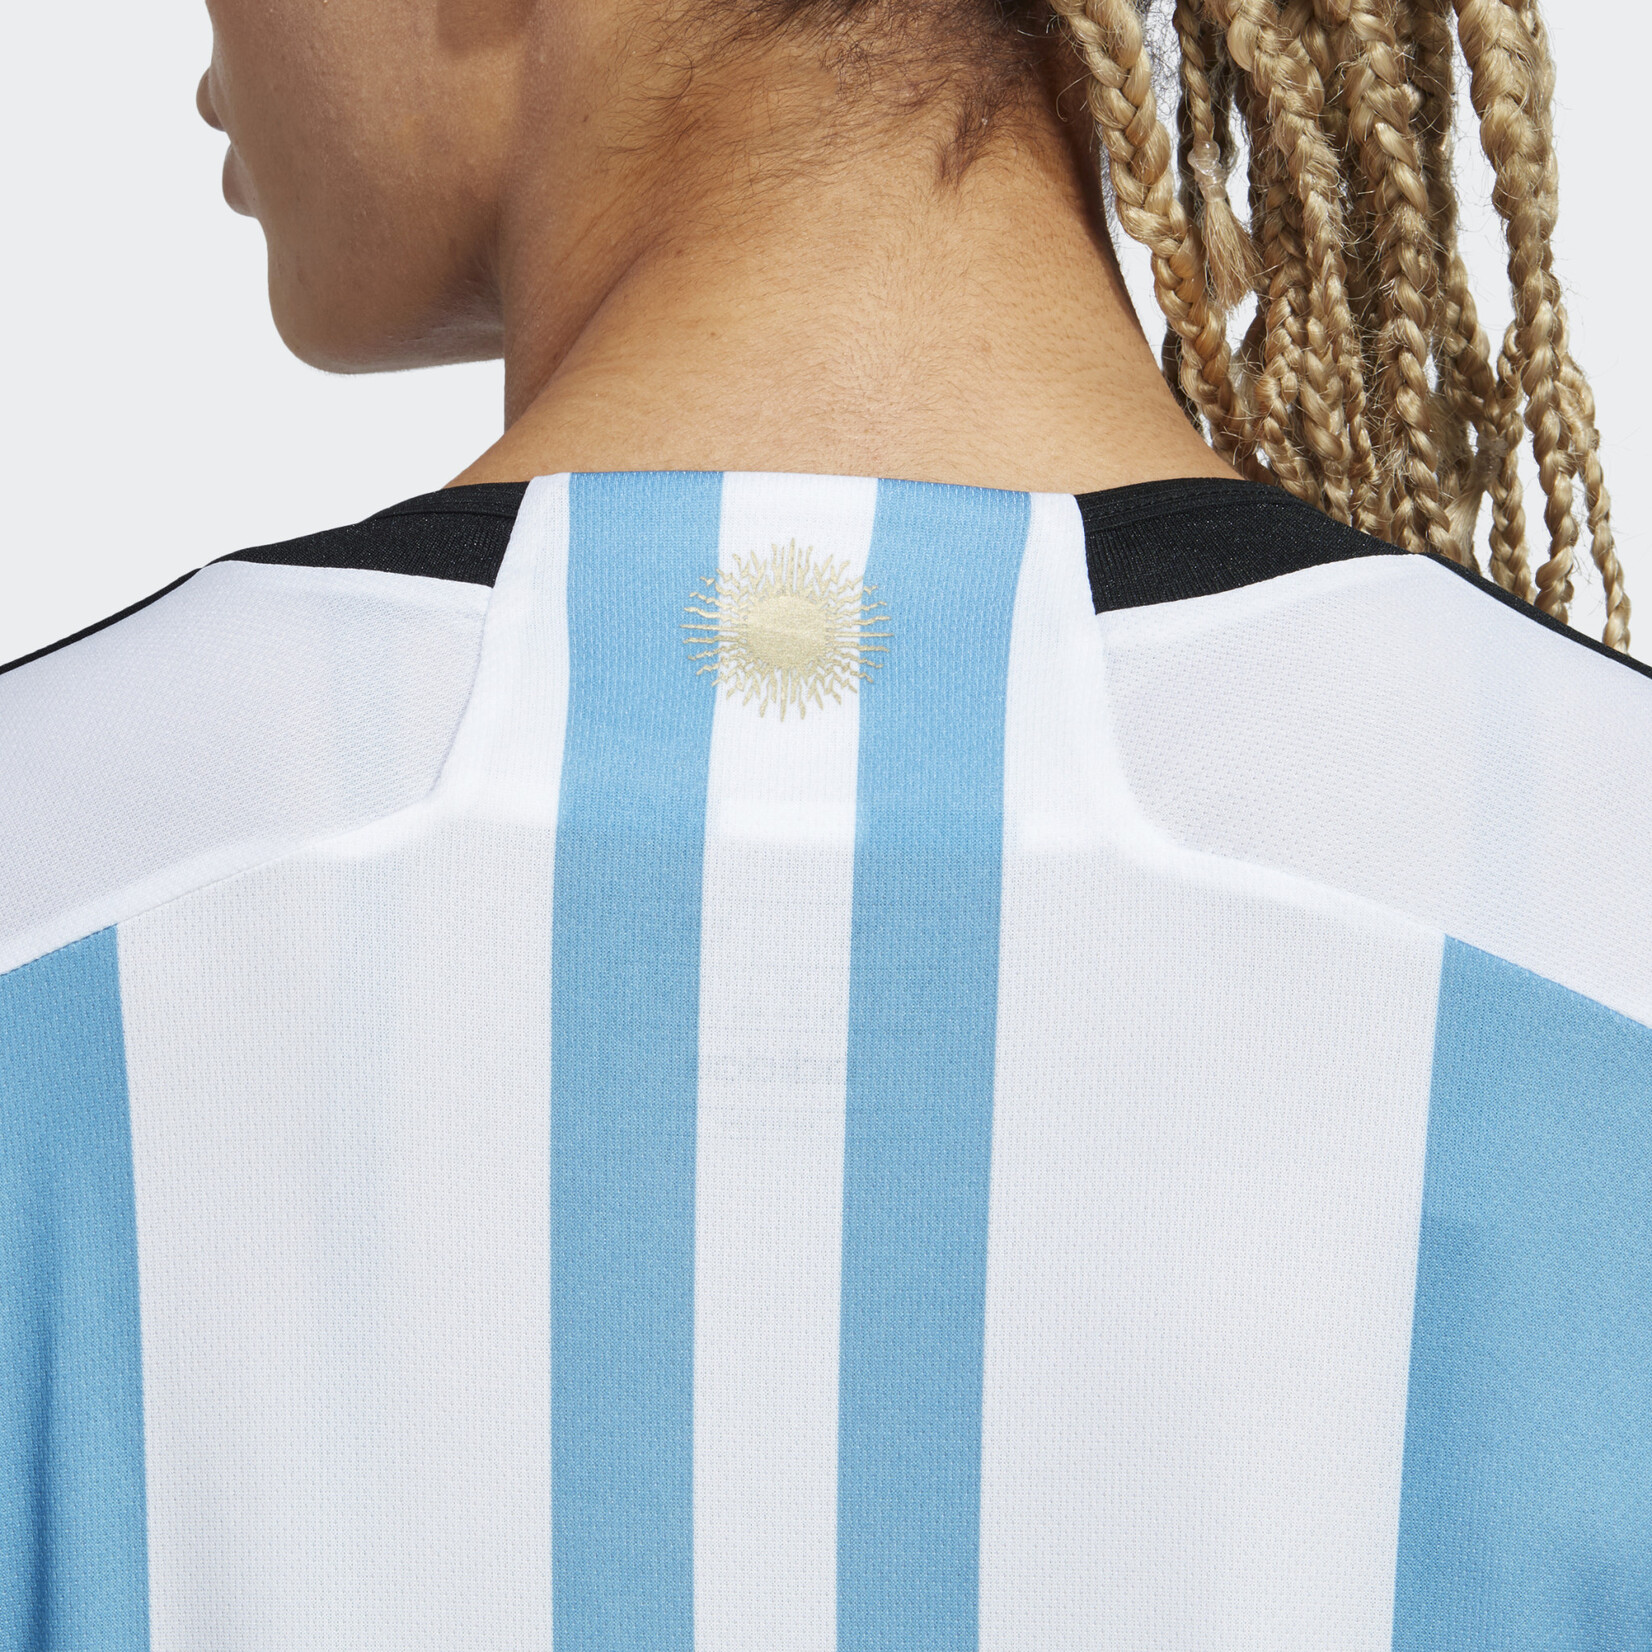 Adidas Argentina 22/23 Home Jersey Champions